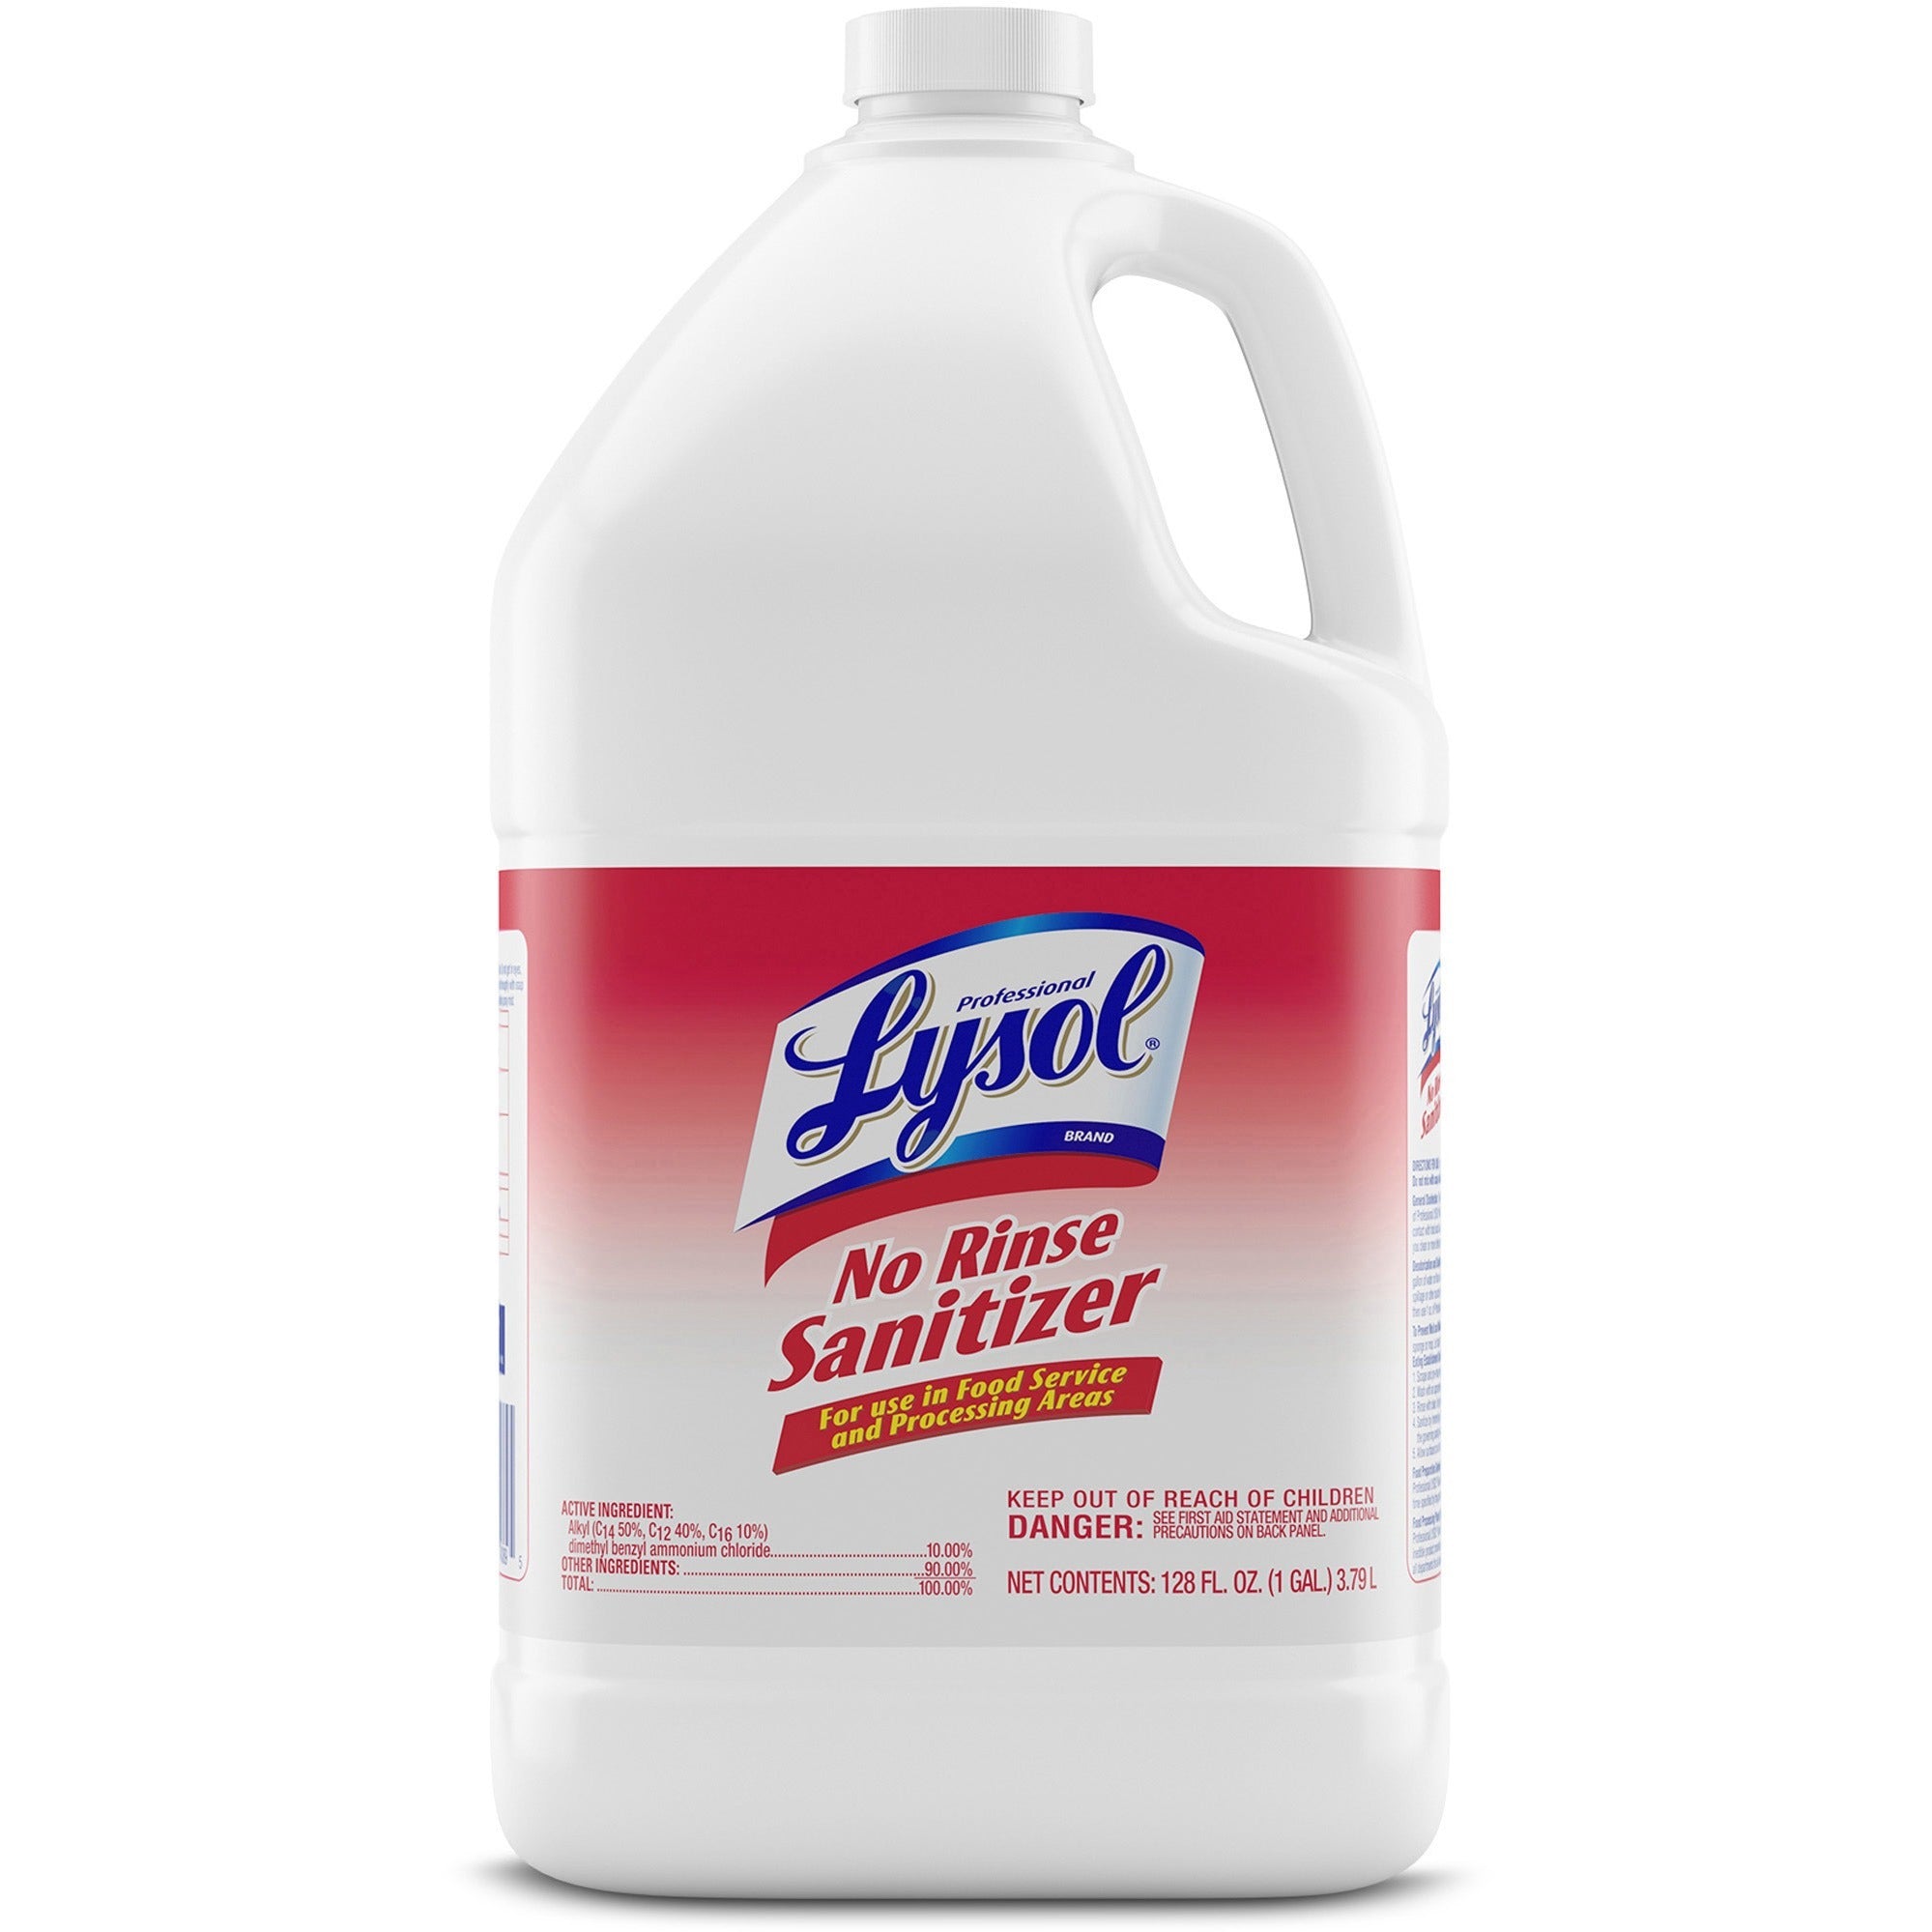 professional-lysol-no-rinse-sanitizer-for-sink-floor-wall-bathtub-food-service-area-concentrate-128-fl-oz-4-quart-4-carton-disinfectant-anti-bacterial_rac74389ct - 2